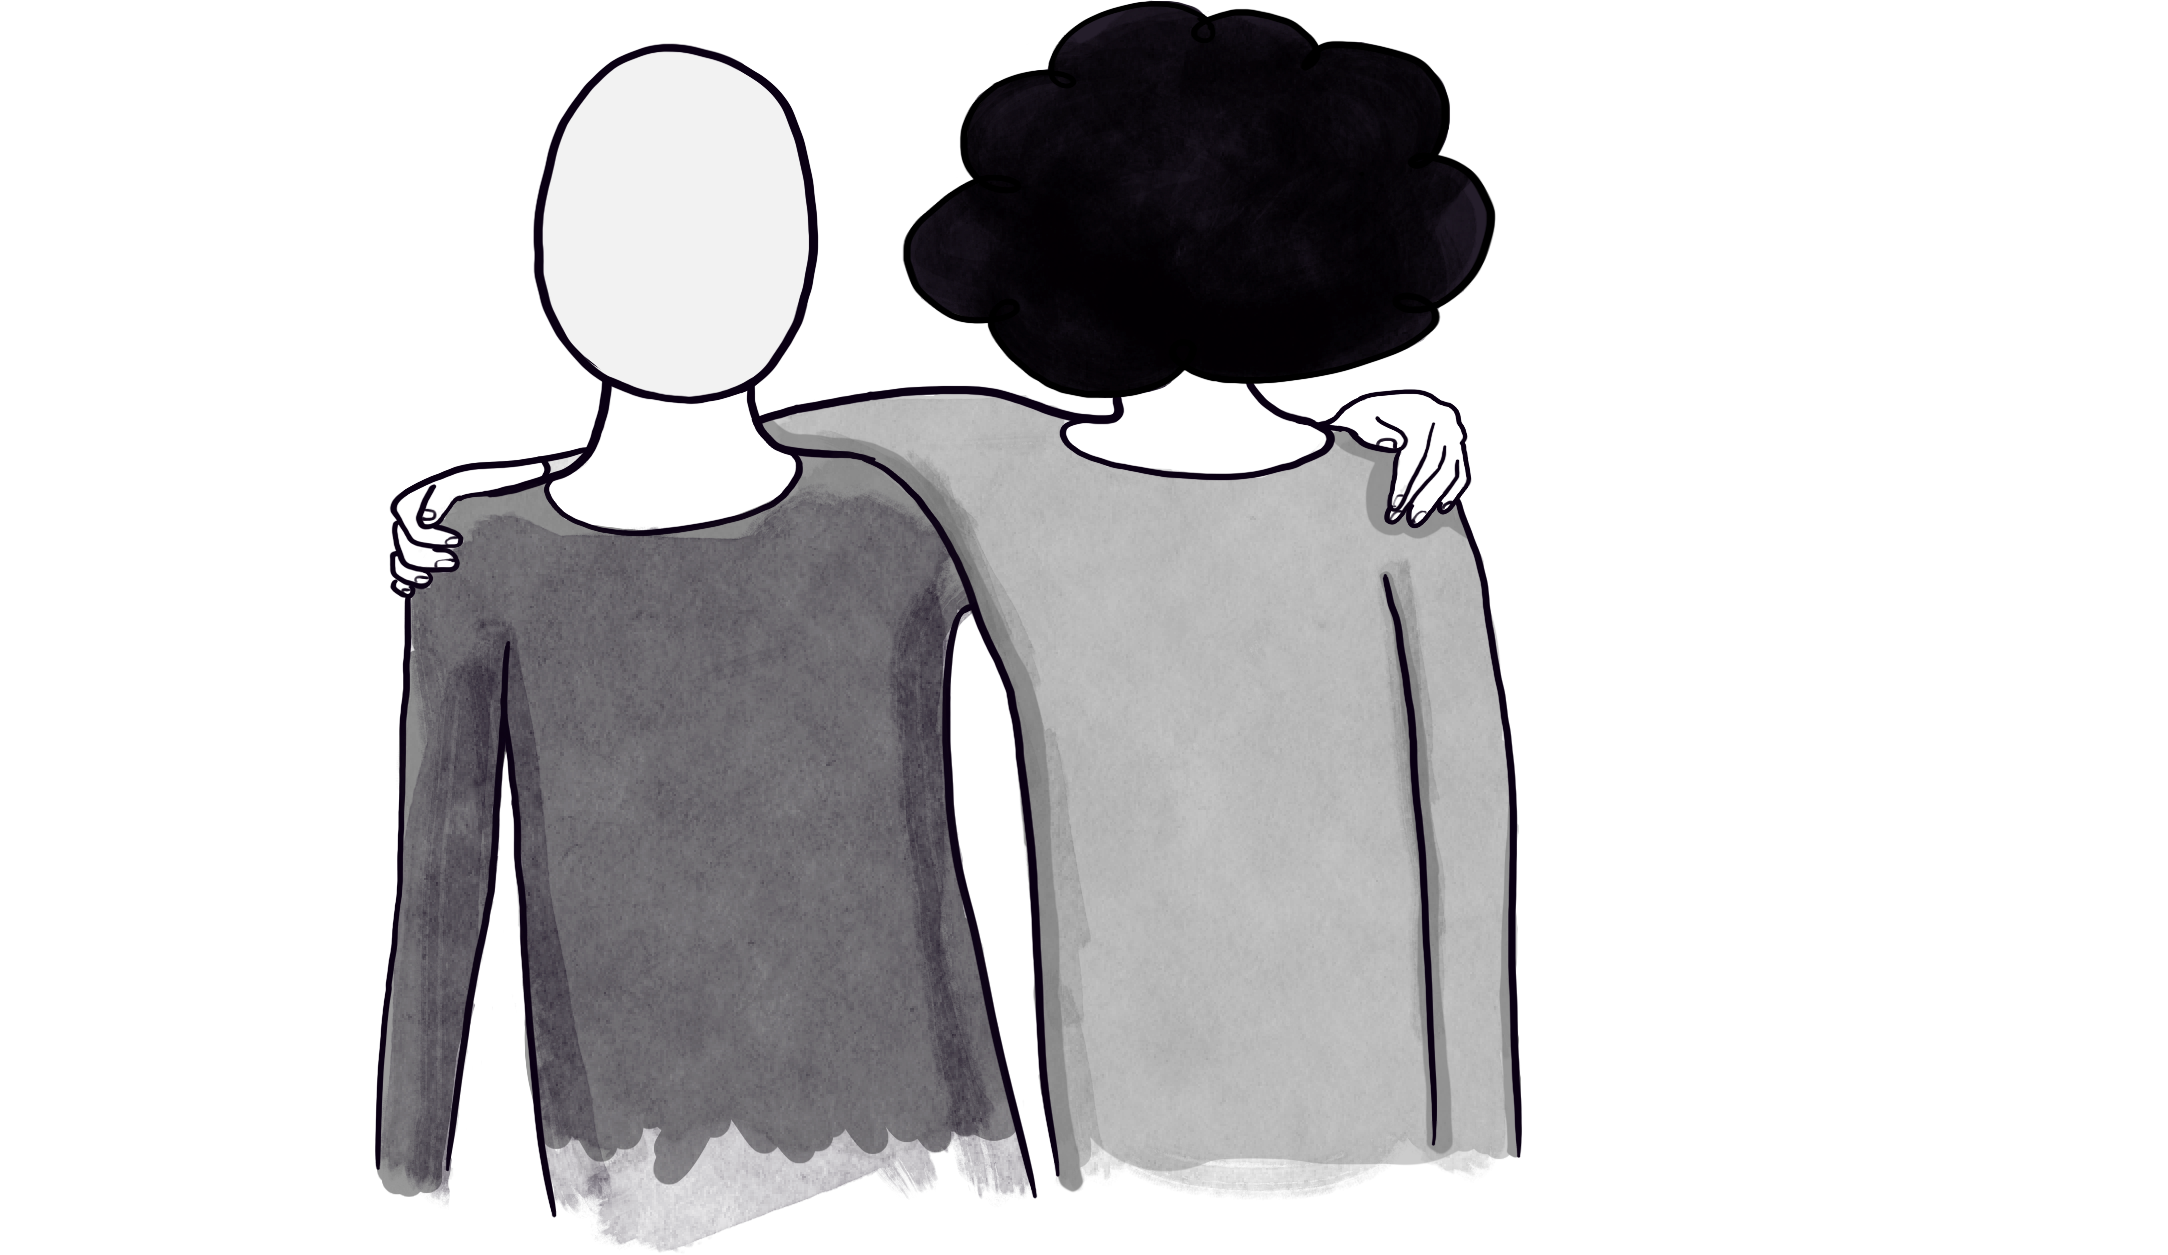 Two people with arms around each other - they are friends. One has a normal head and the other has a black cloud for a head.